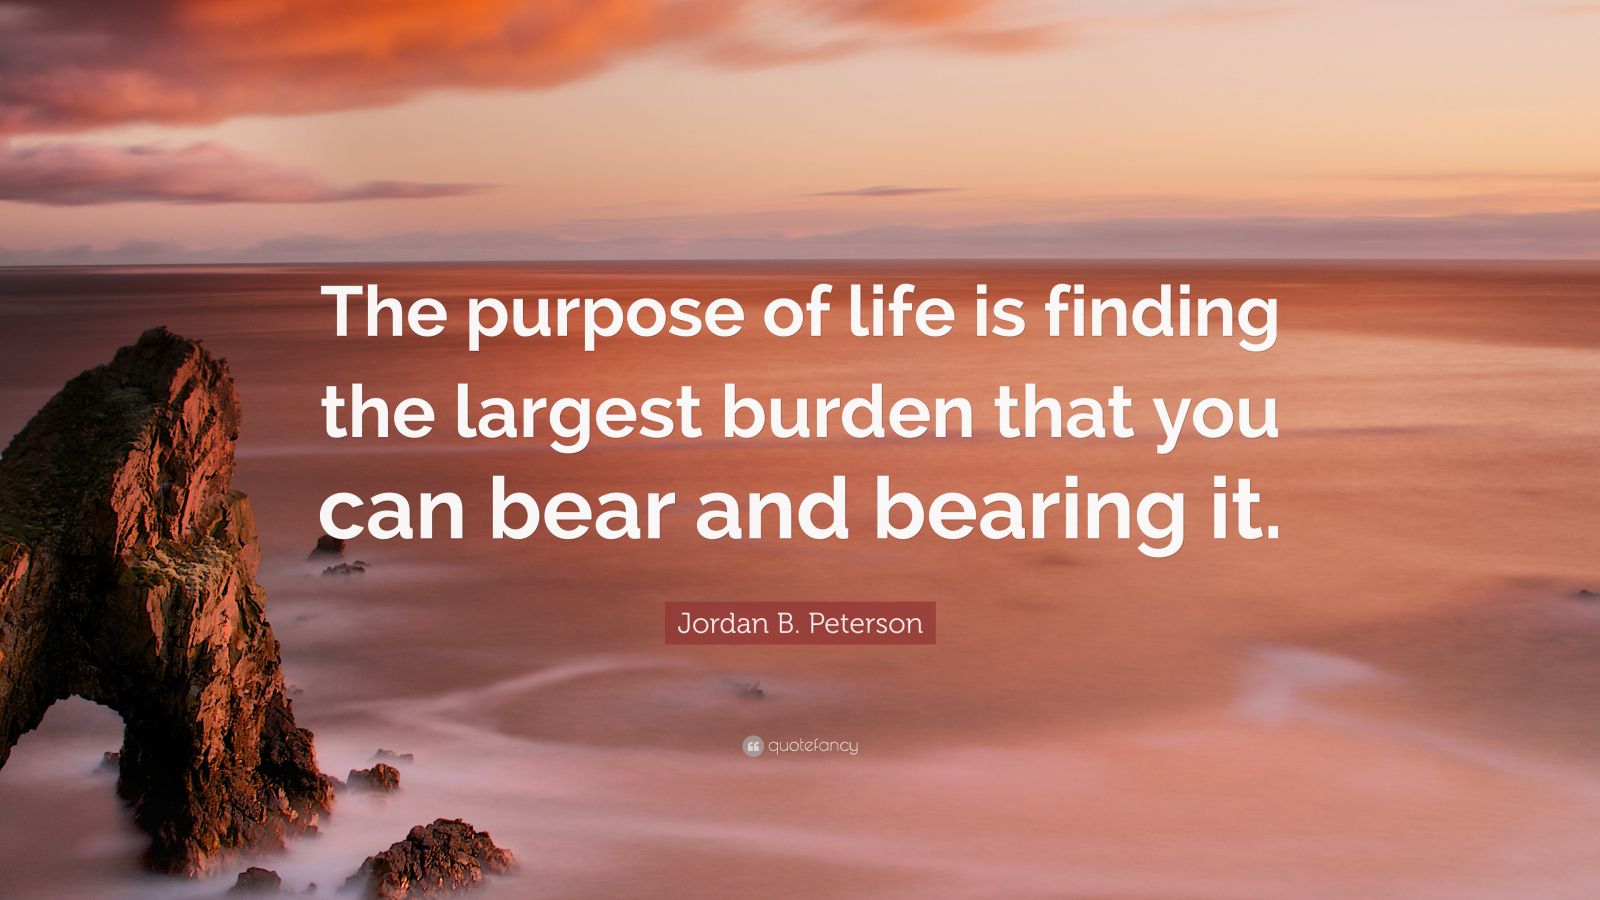 Jordan B. Peterson Quote: “The purpose of life is finding the largest